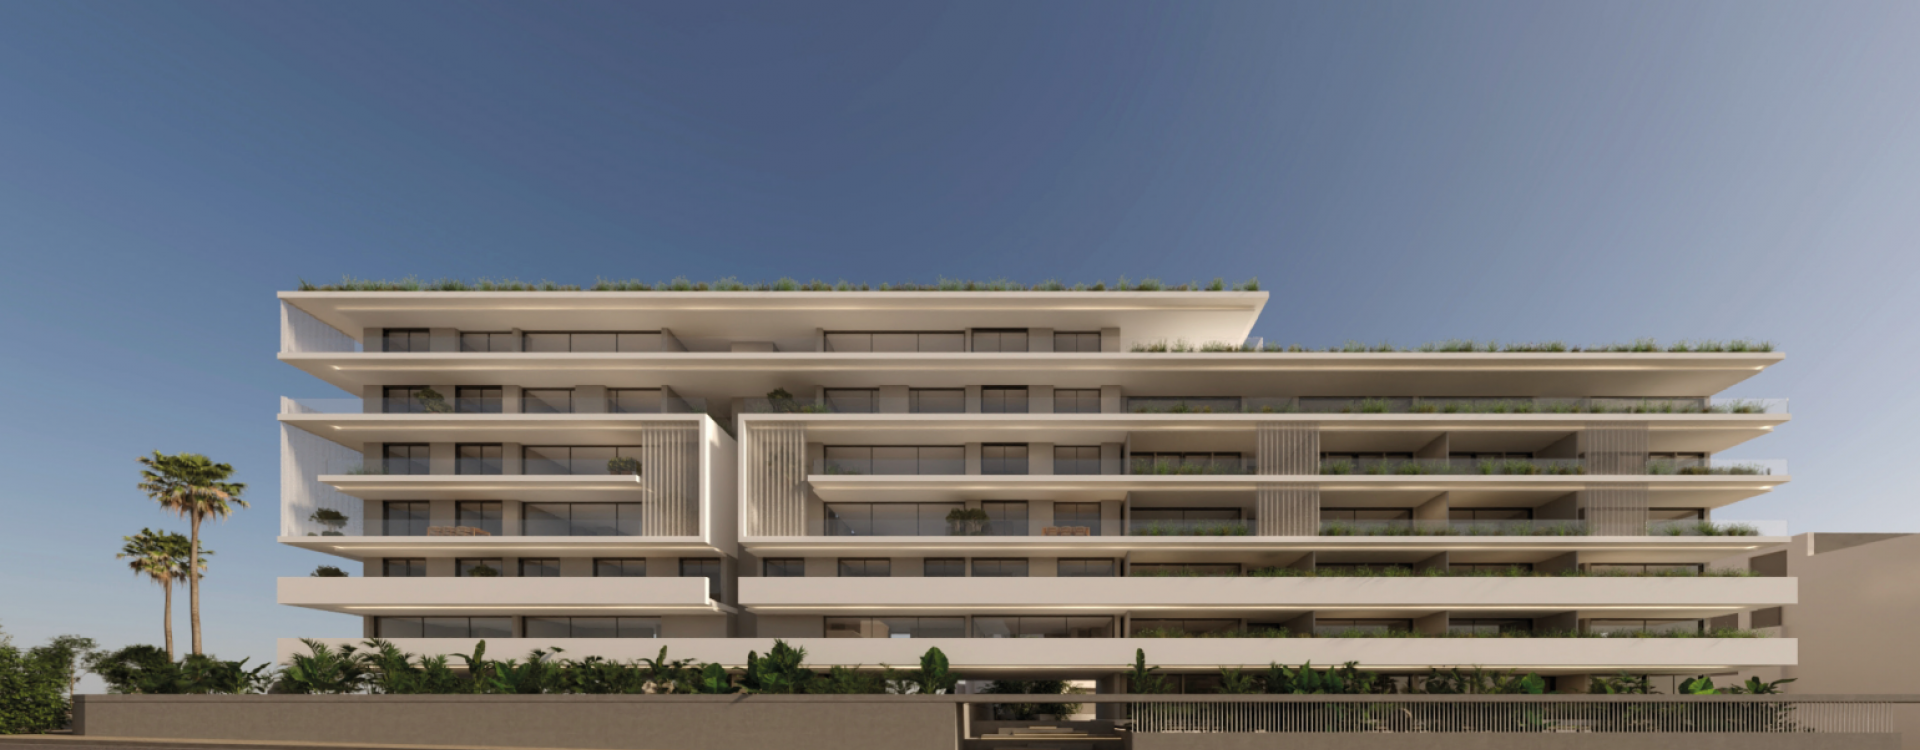 New residential project in Glyfada offering 30 high-end units